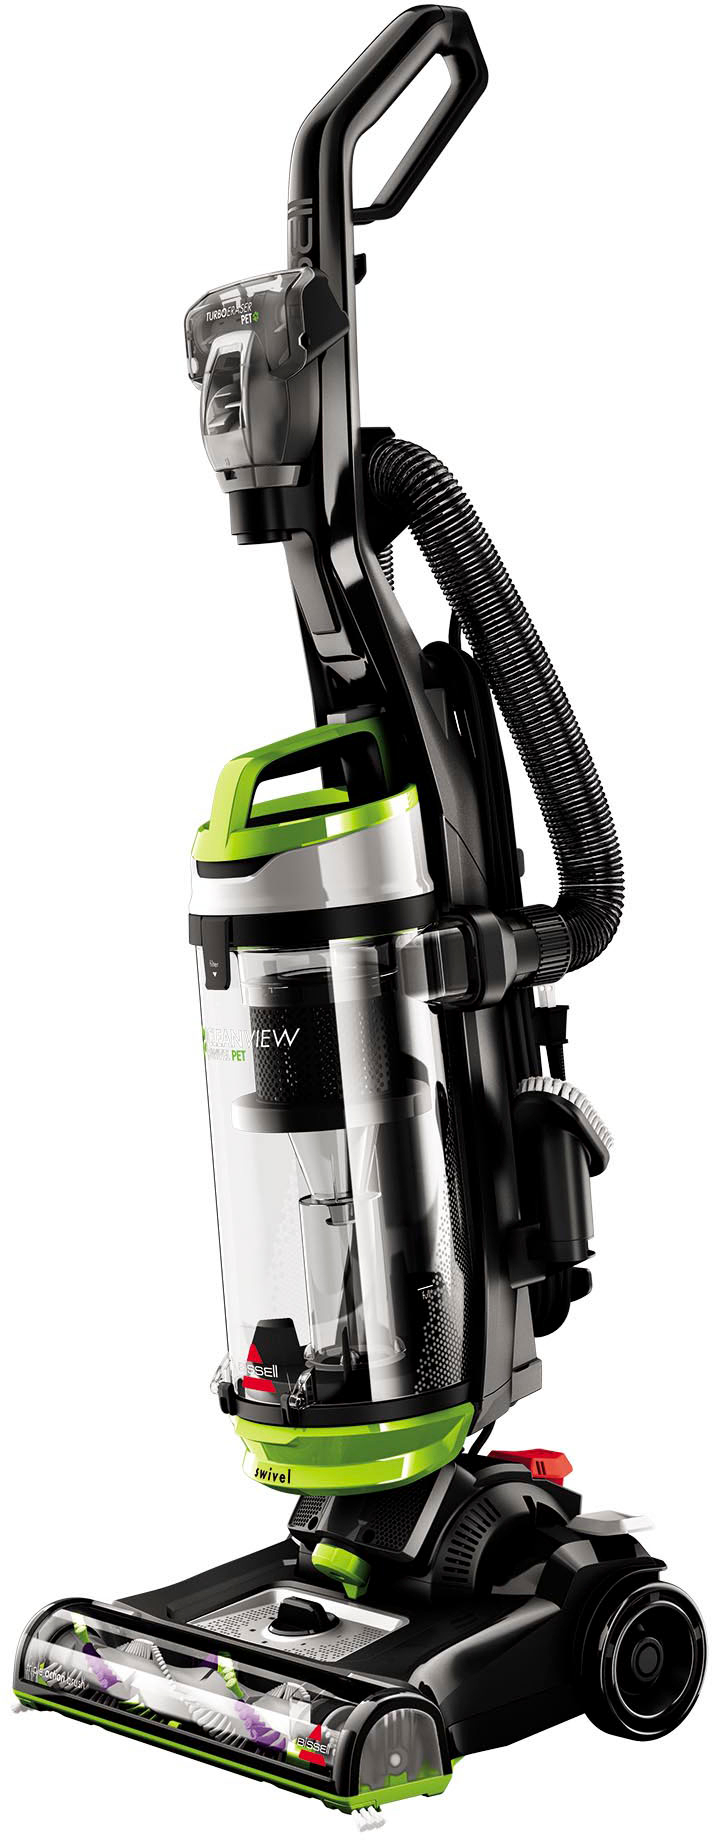 Left View: BISSELL - CleanView Swivel Pet Vacuum Cleaner - Sparkle Silver/Cha Cha Lime with black accents